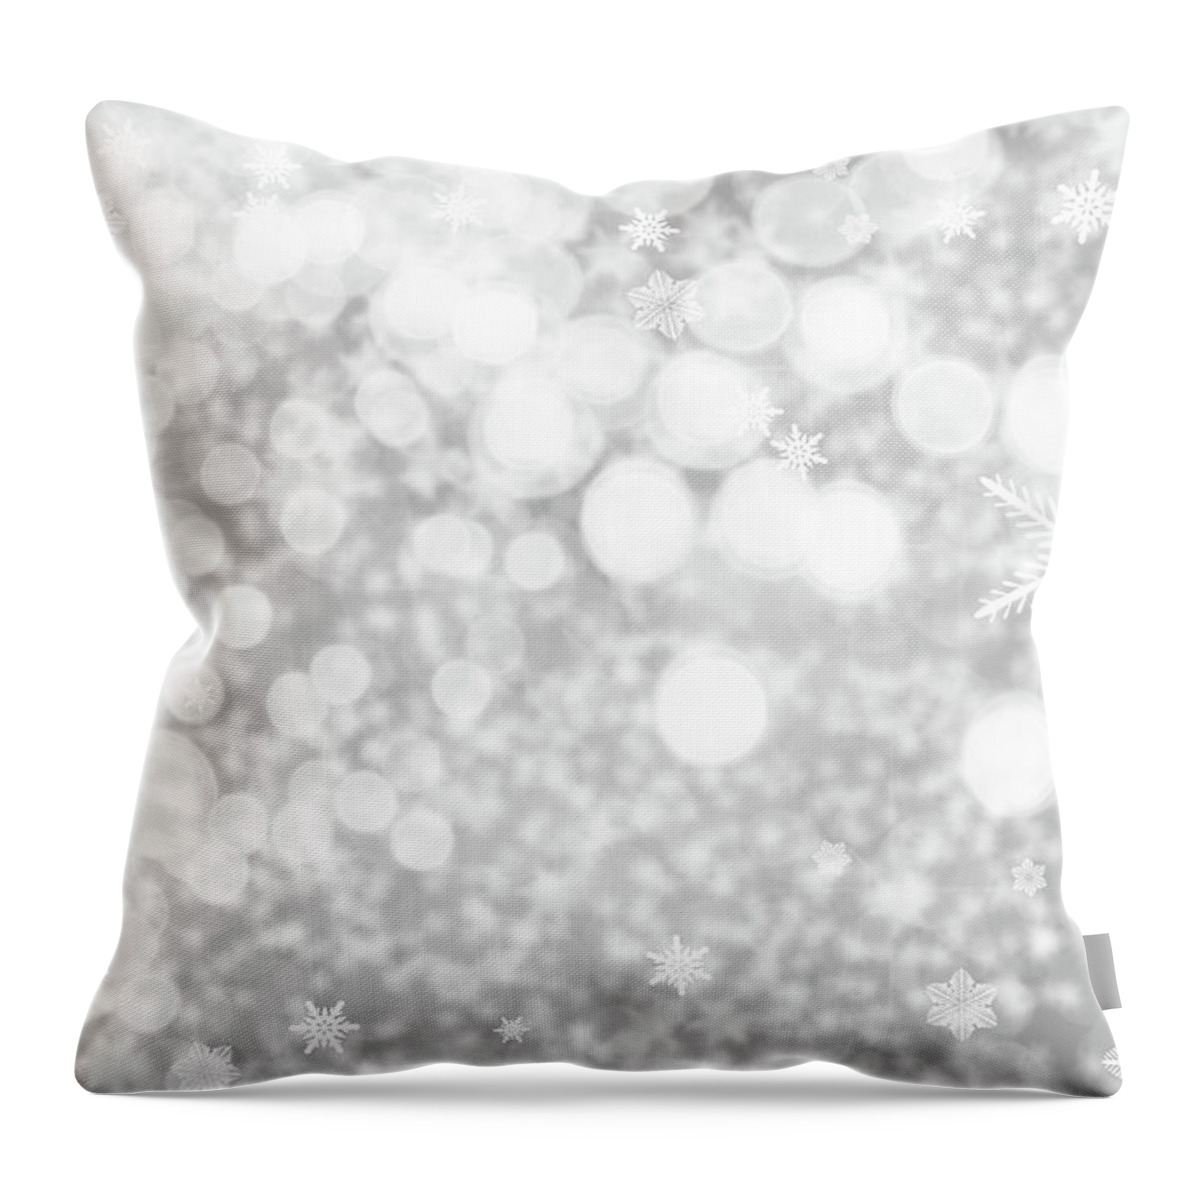 Snow Throw Pillow featuring the photograph White Parkles by Enter89